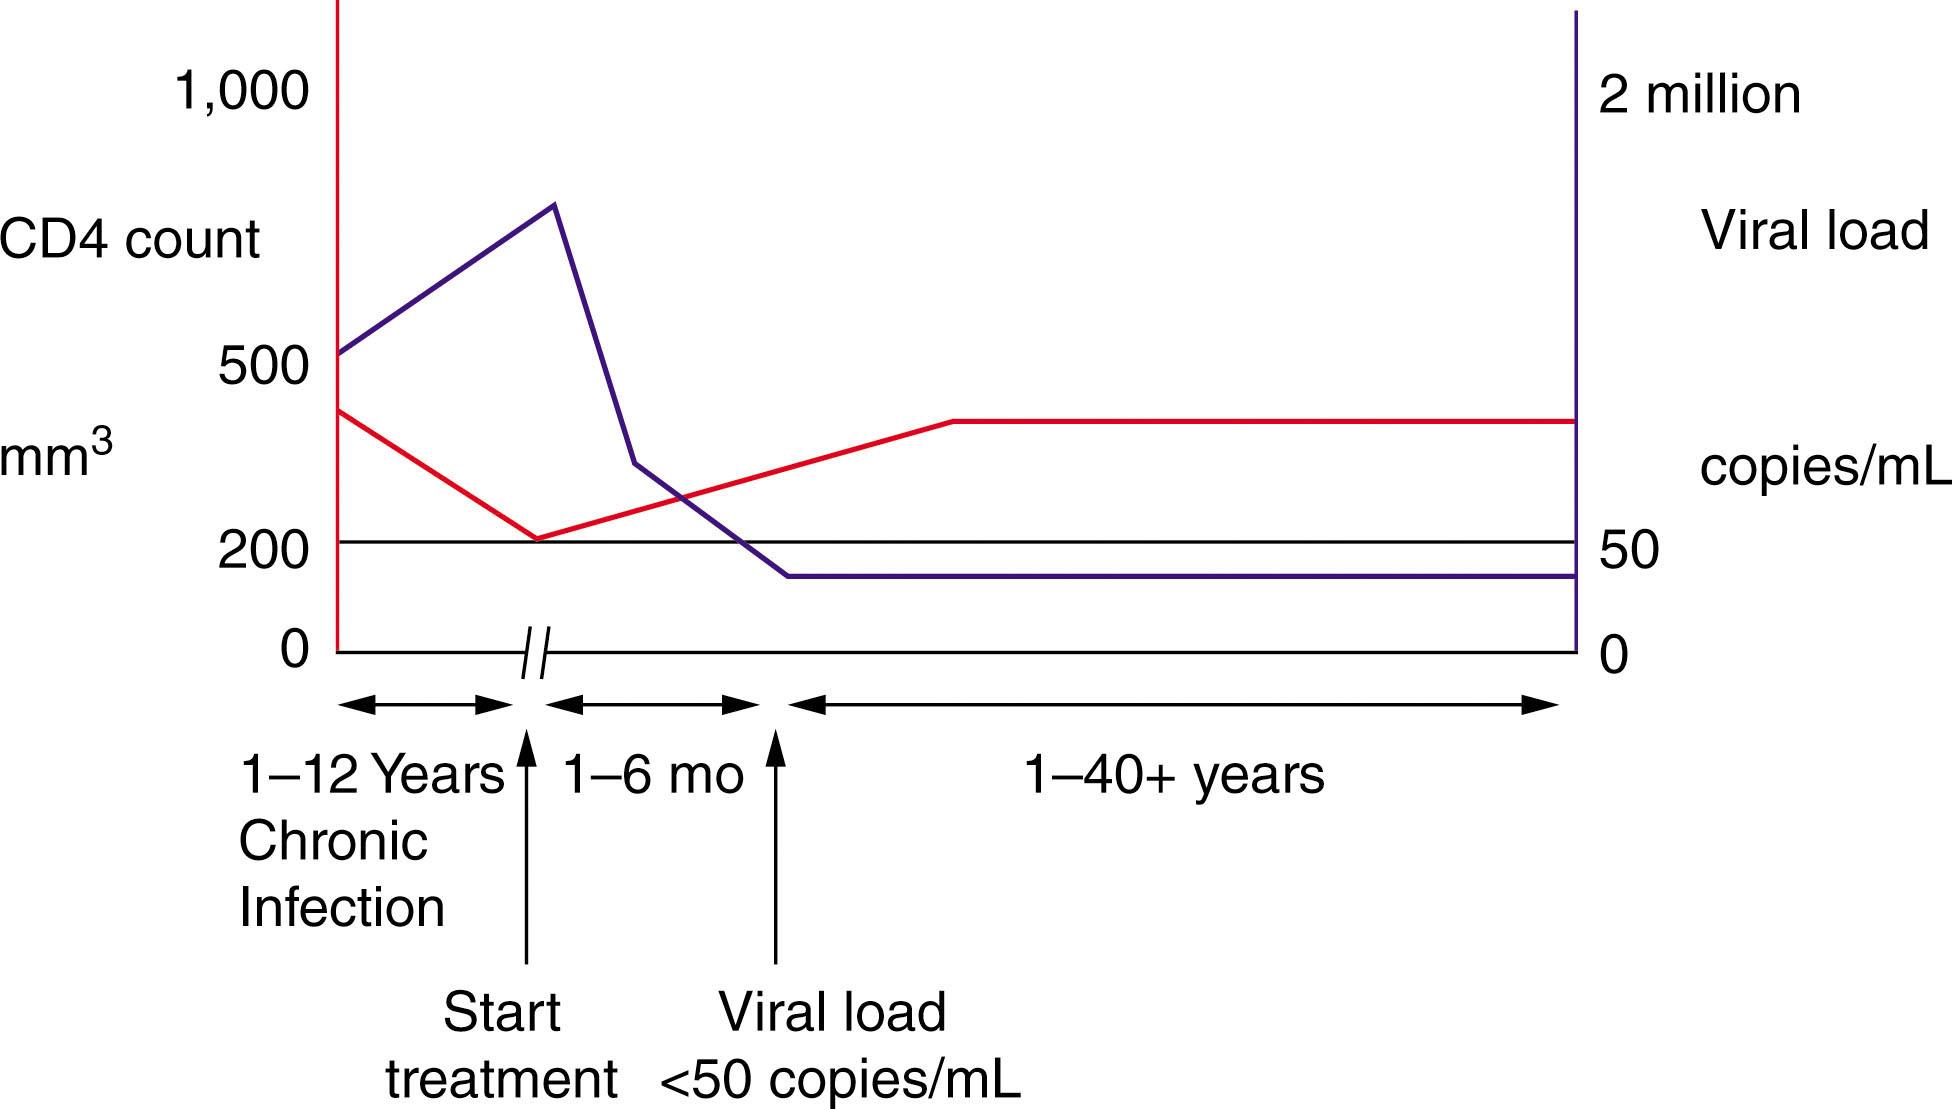 Figure 152.2, EFFECT OF ART ON CD4 COUNT AND VIRAL LOAD.